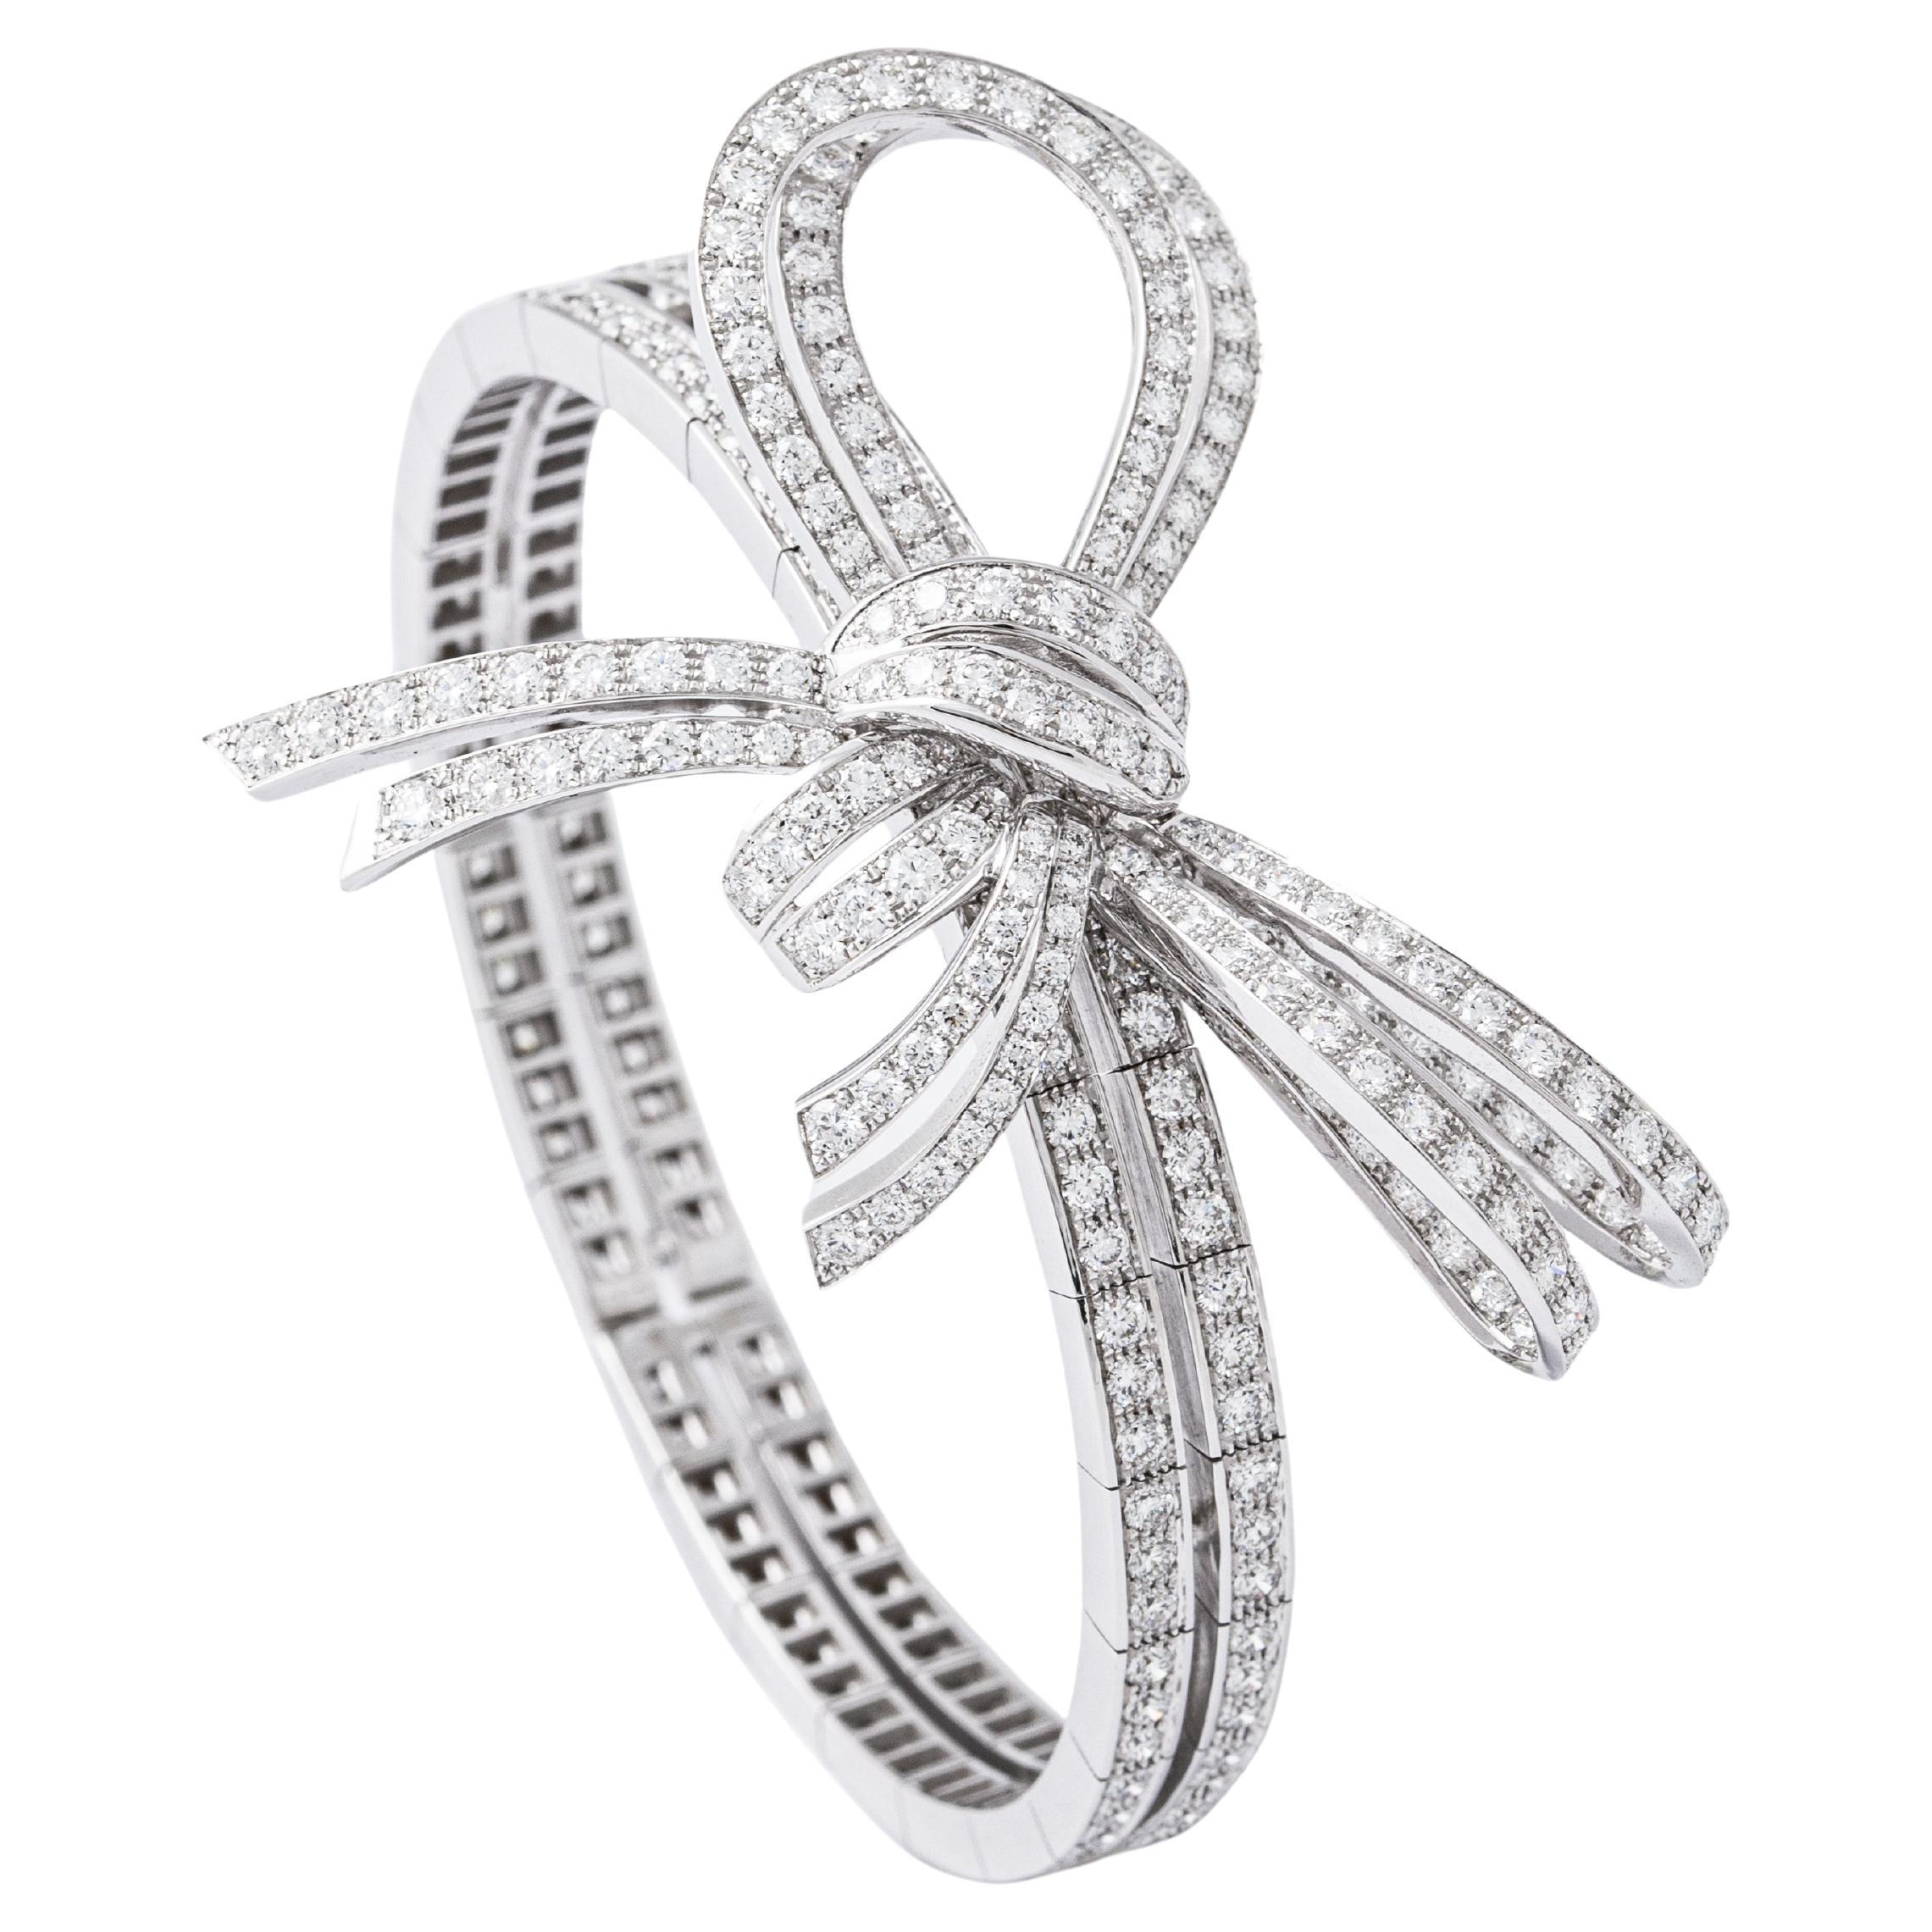 Node bangle in 18K white gold set with 309 diamonds 8.04 cts. Flexible.
Node dimensions: 5.50 x 4.00 centimeters.
Wrist size: approximately 17.50 to 19.00 centimeters.

Bracelet is flexible.
